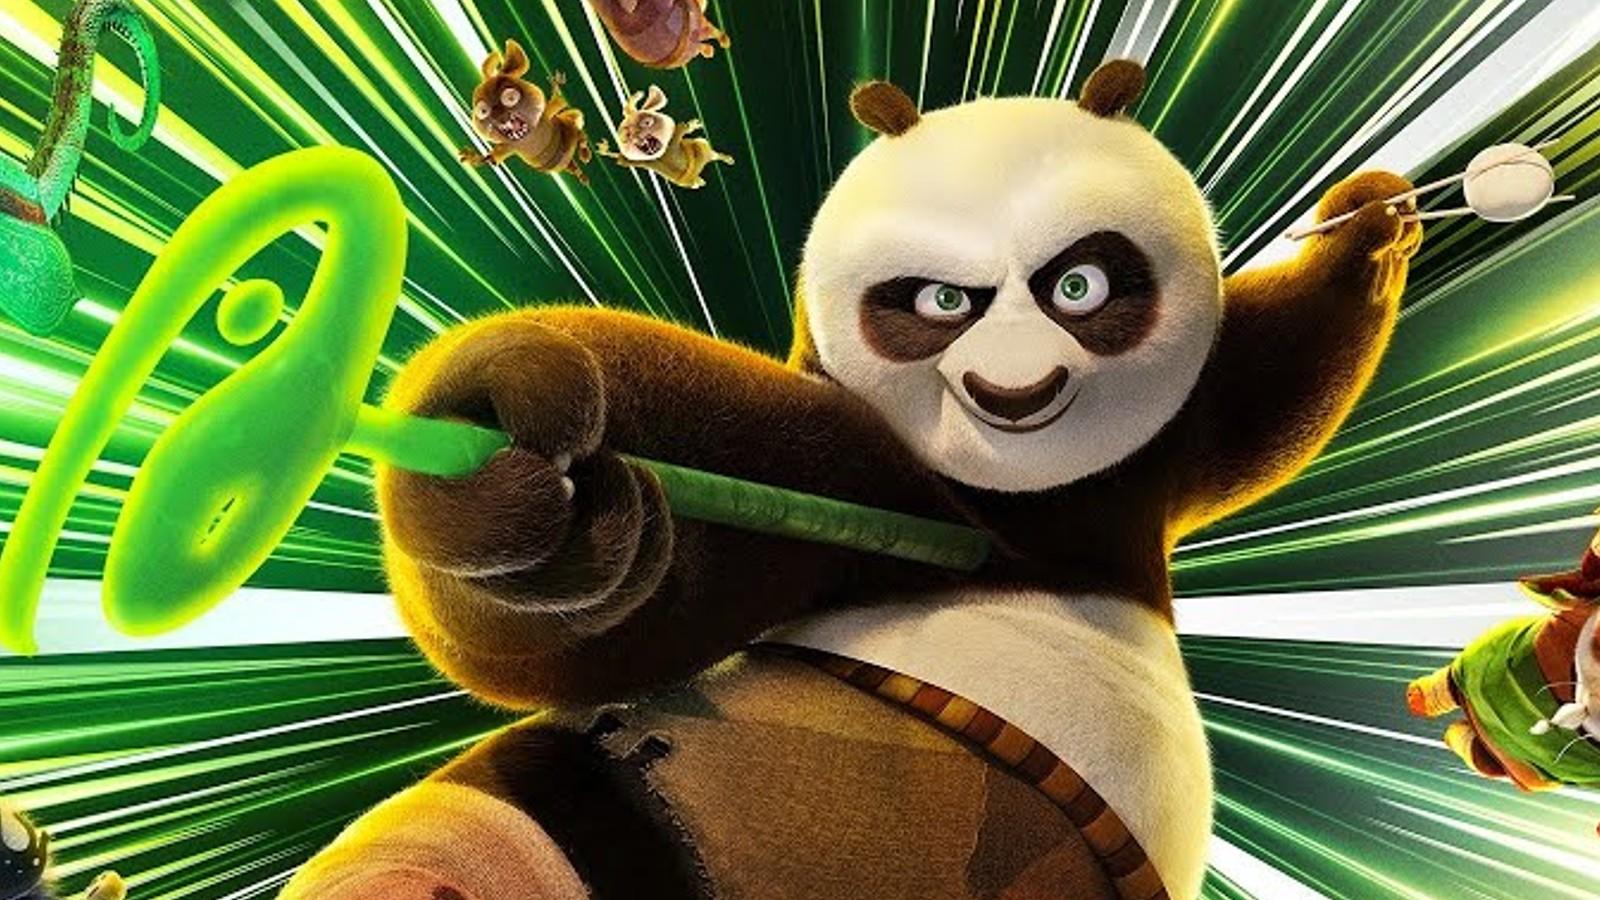 Po in action on the Kung Fu Panda 4 poster.